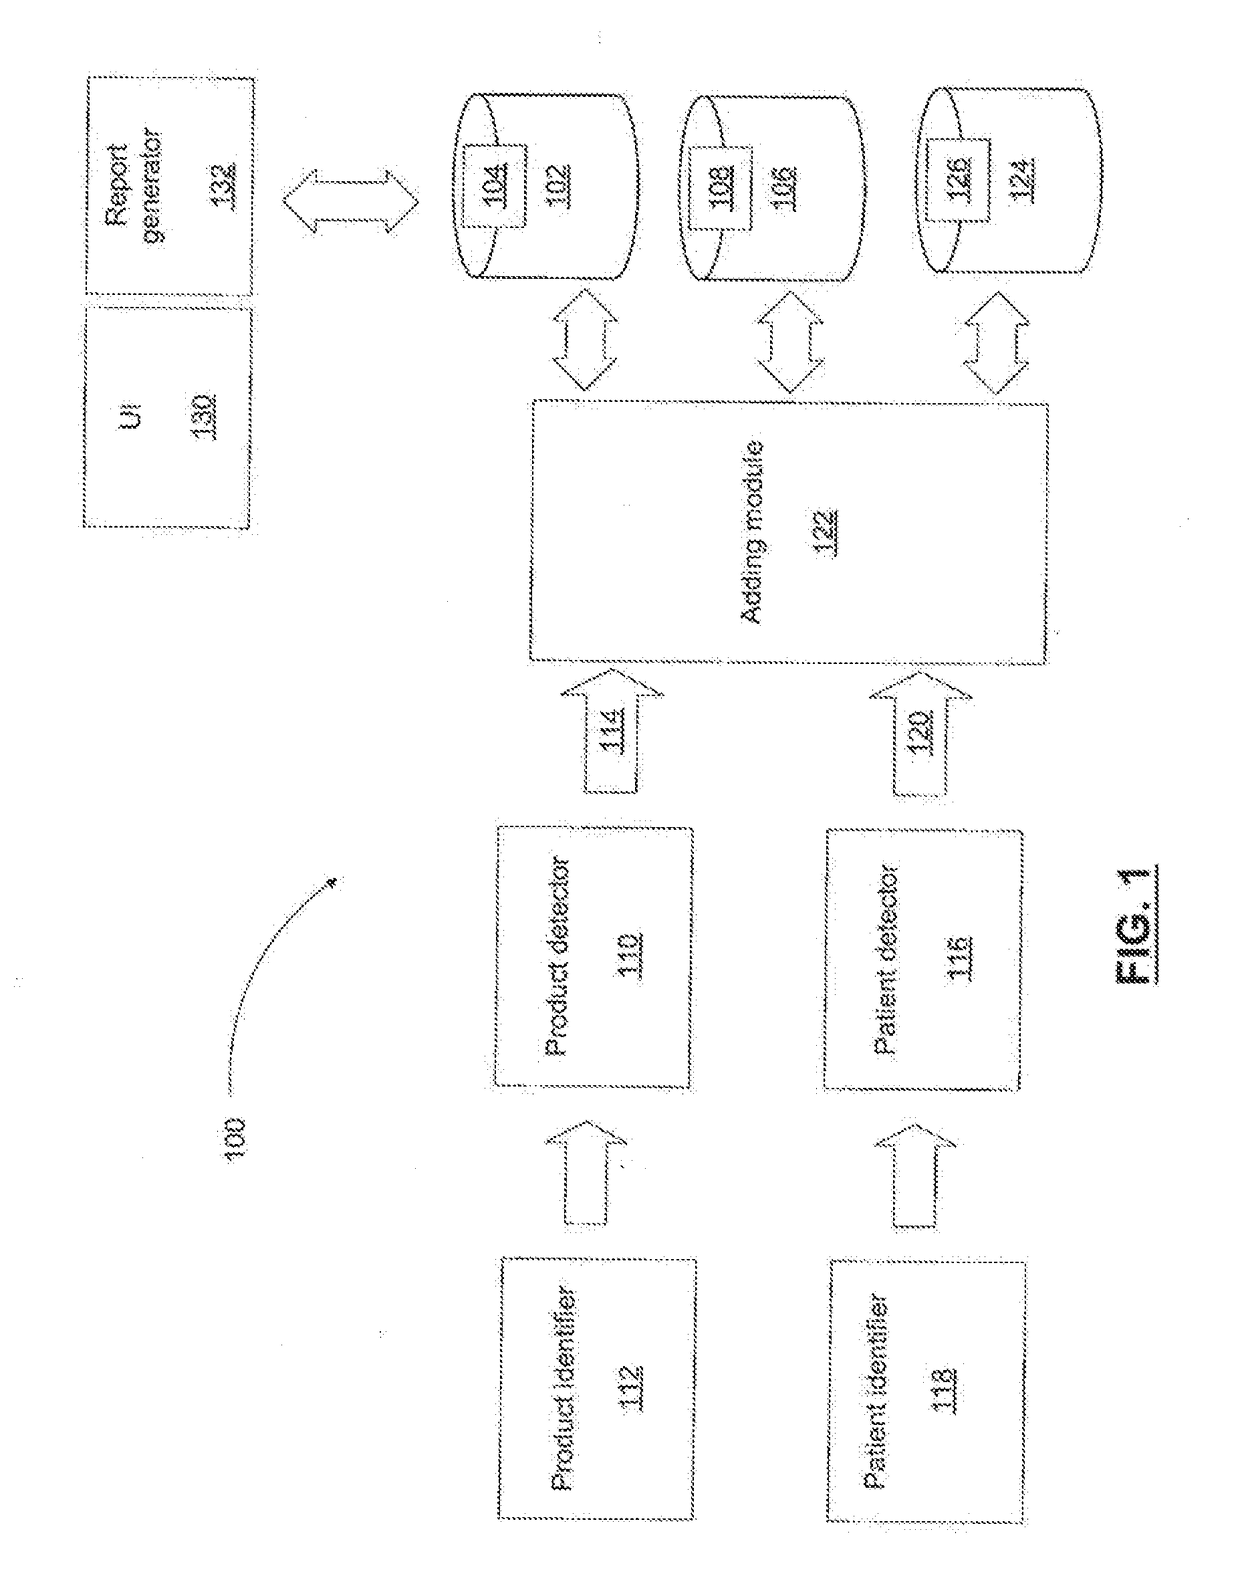 Systems and methods for automatically tracking products in a medical facility